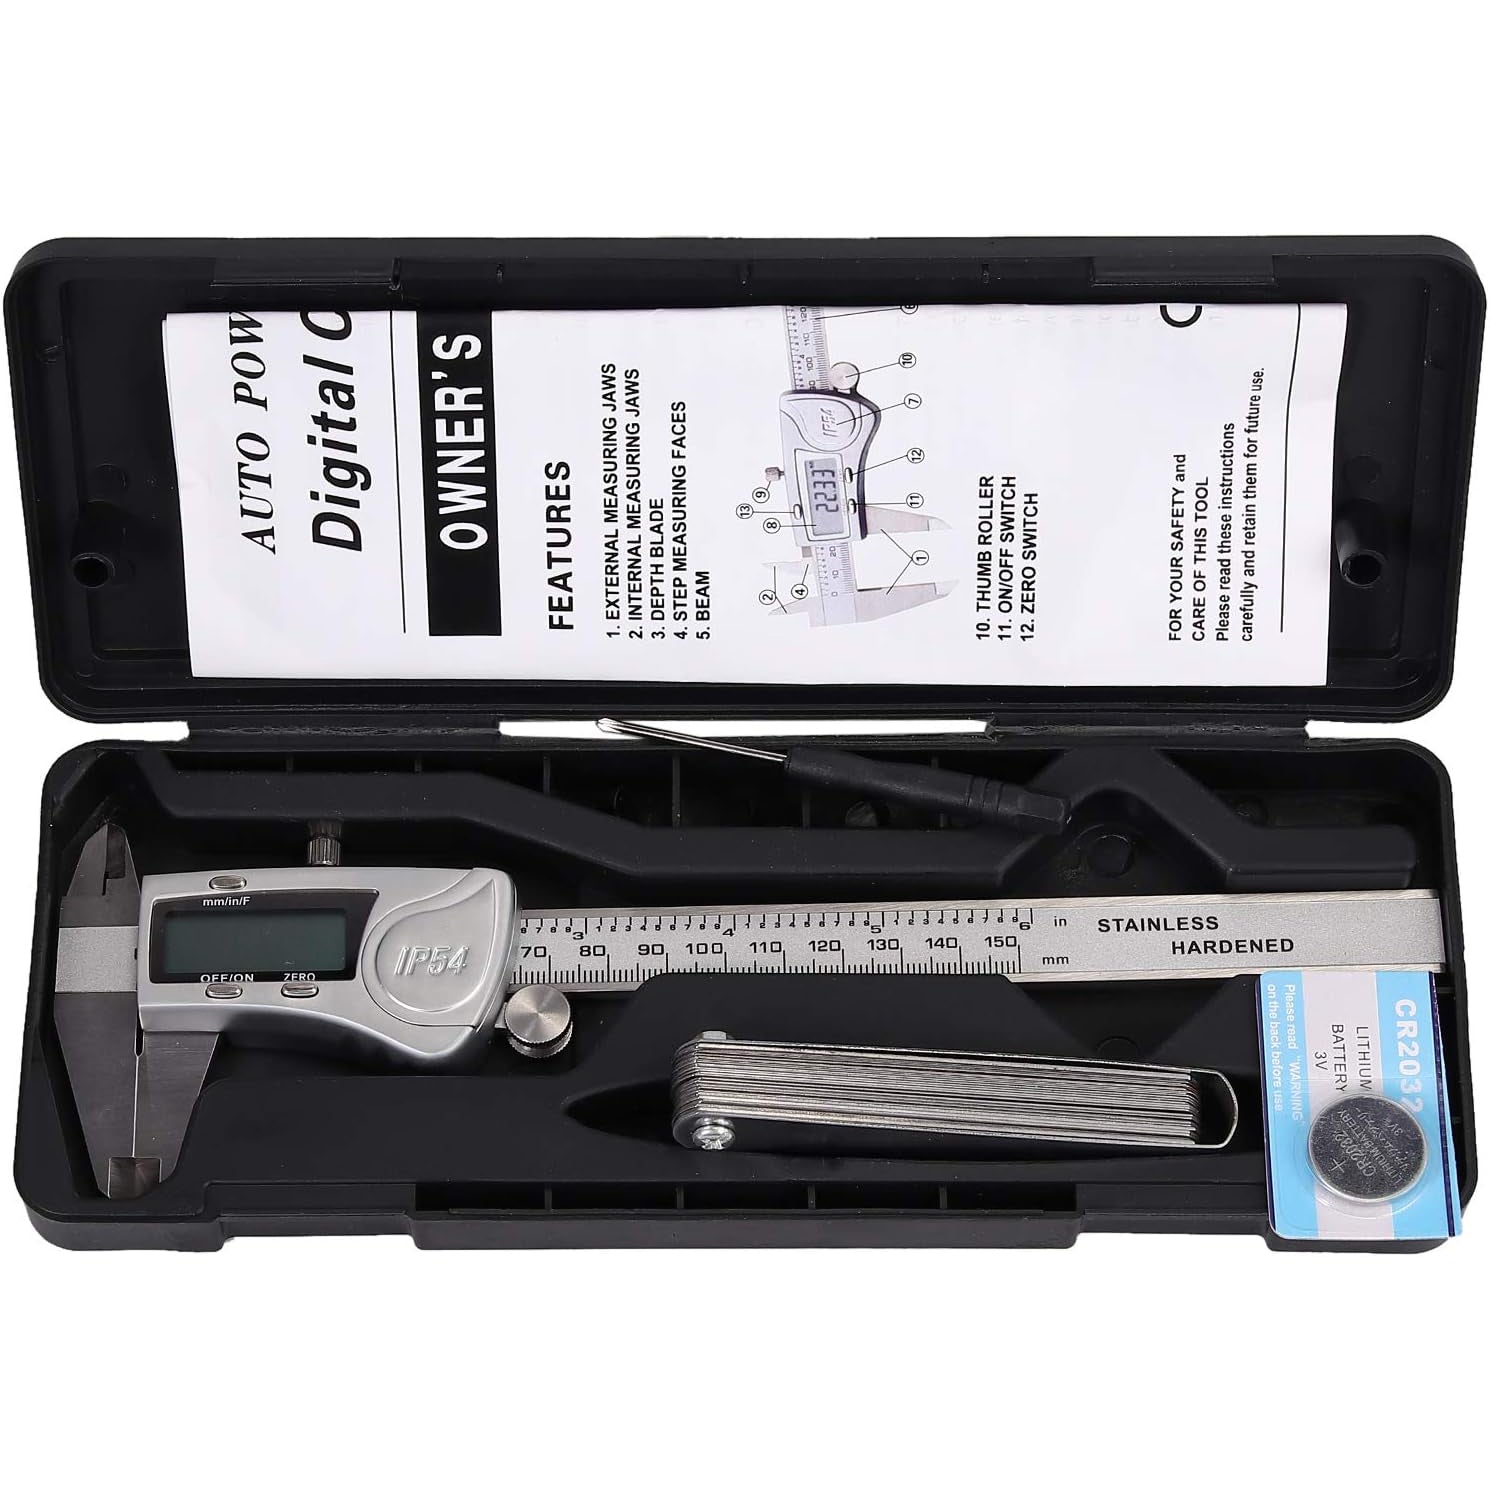 Proster IP54 Digital Caliper 6inch, Vernier Caliper with Large LCD Screen with 32 Blades Feeler Gauge